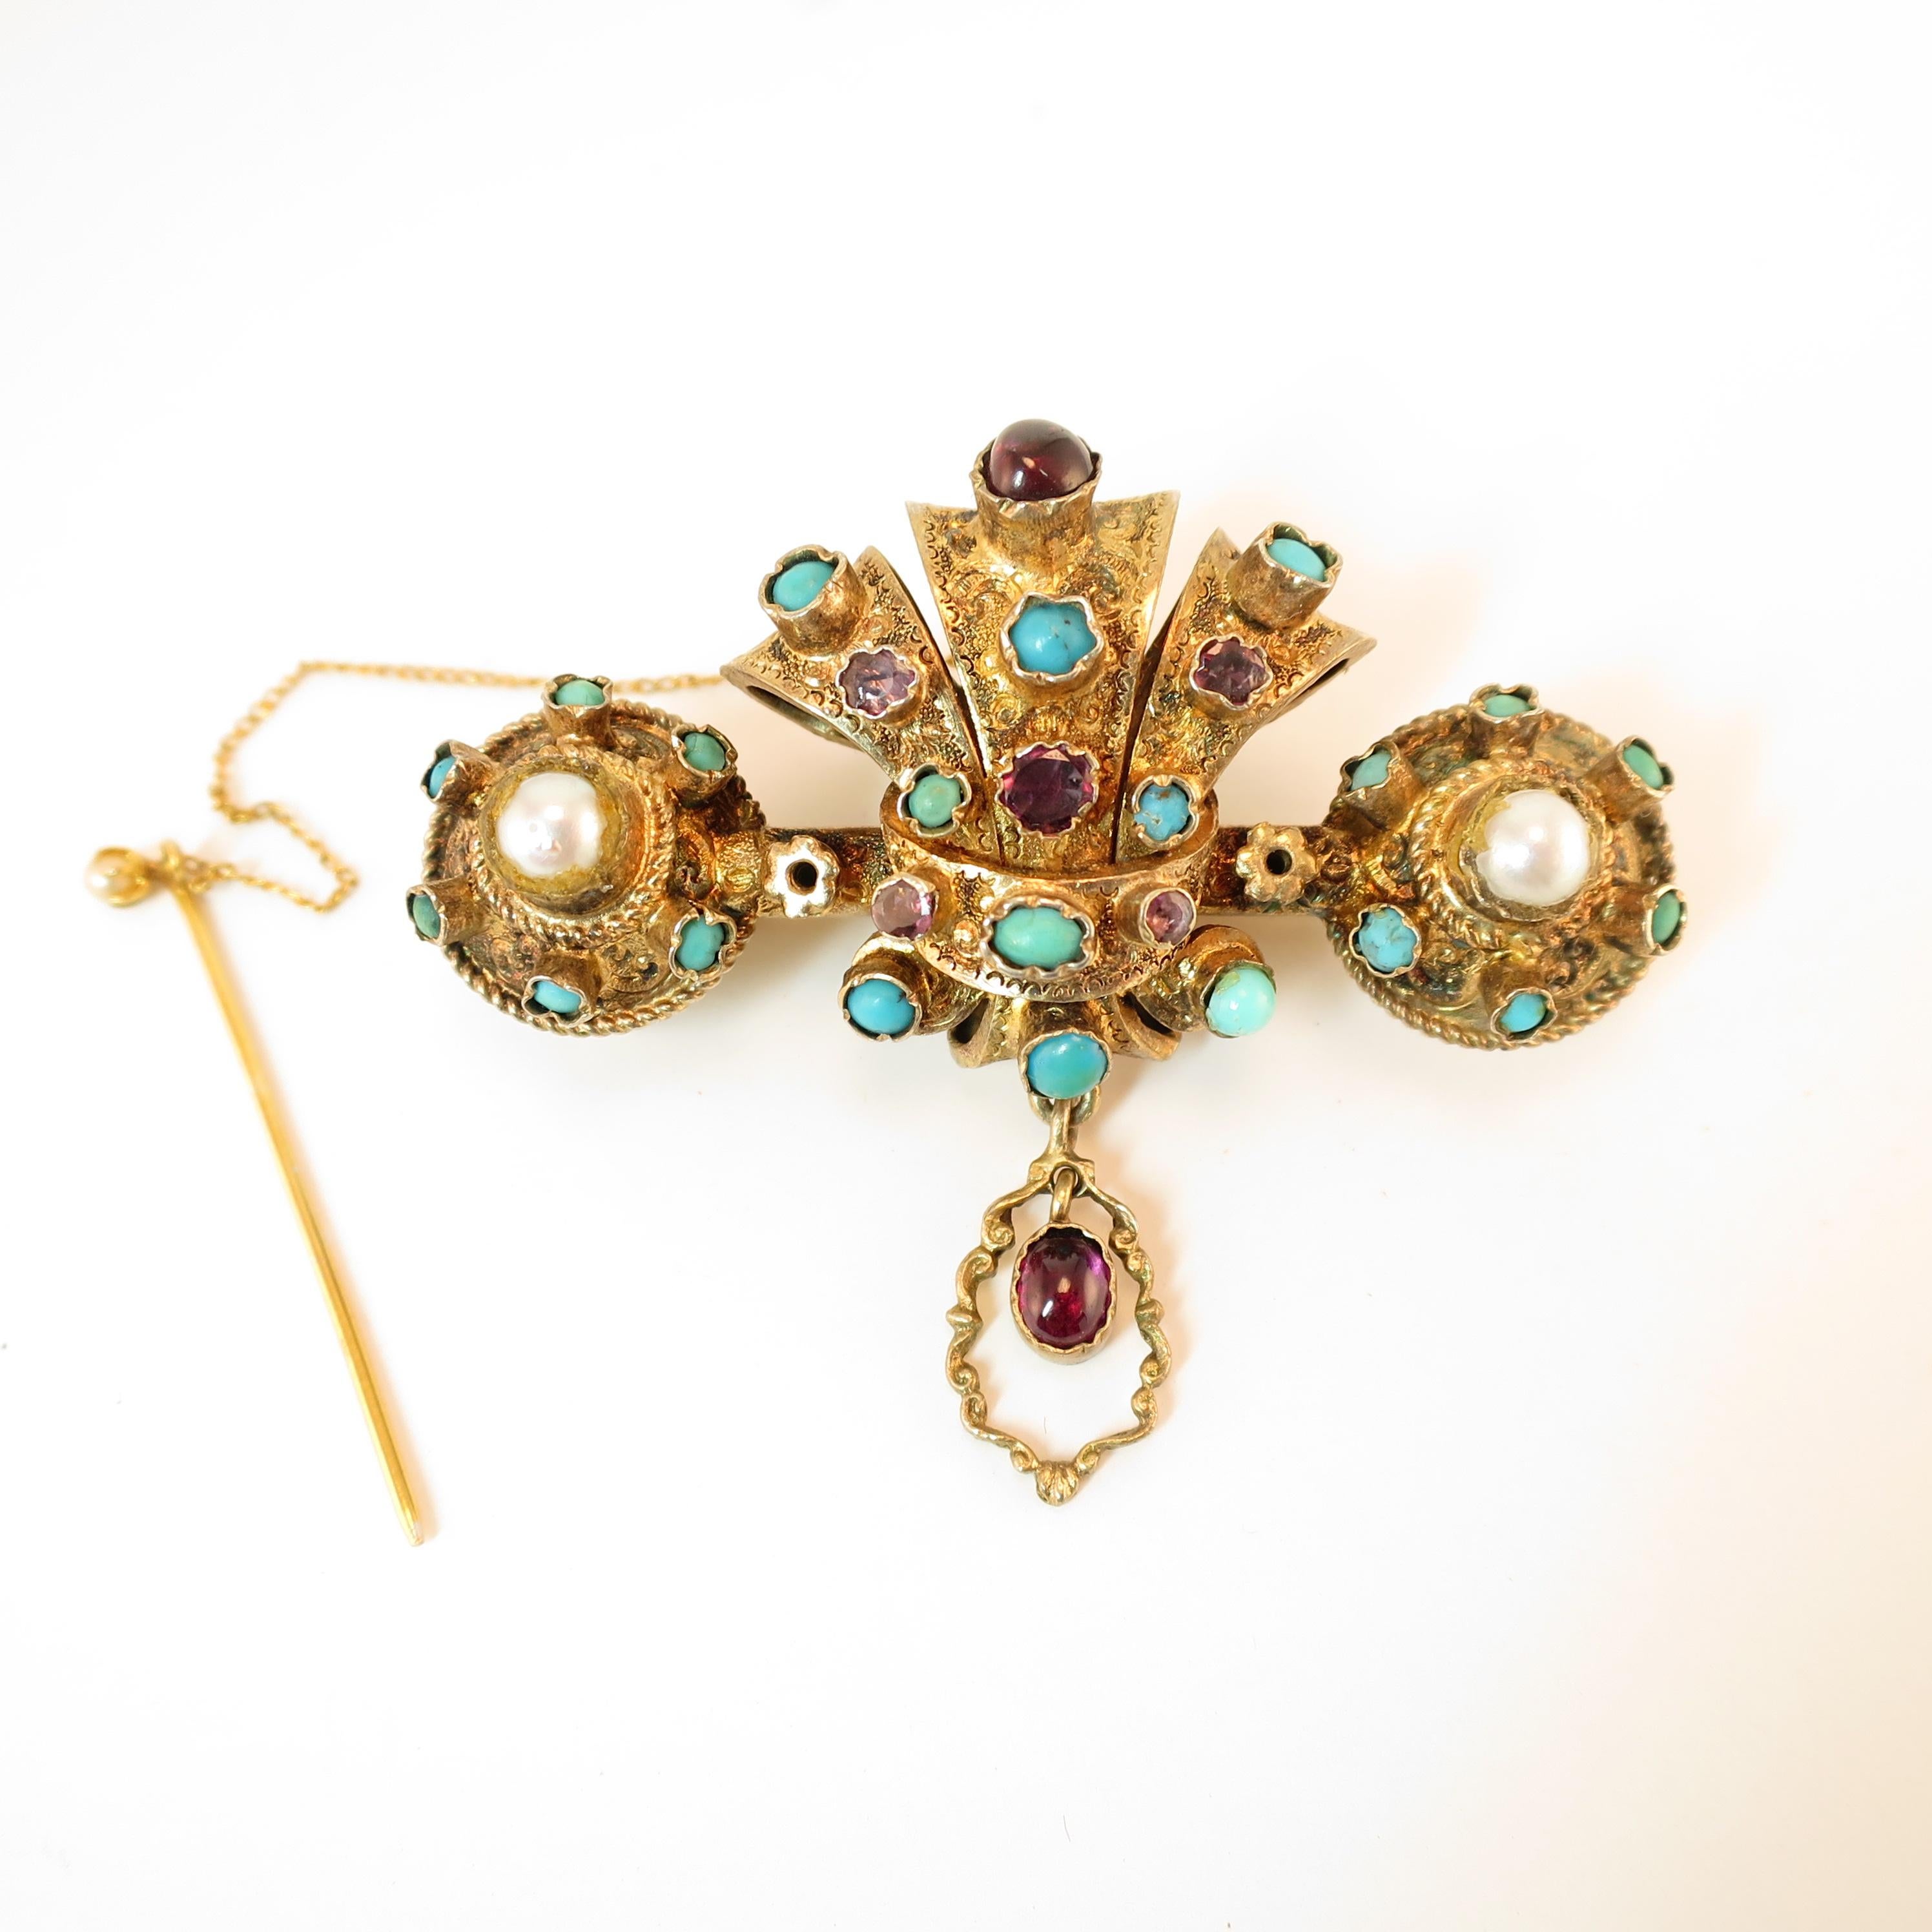 Georgian Baroque Brooch 10k Gold Amethyst Turquoise Pearls Circa 1840 For Sale 3